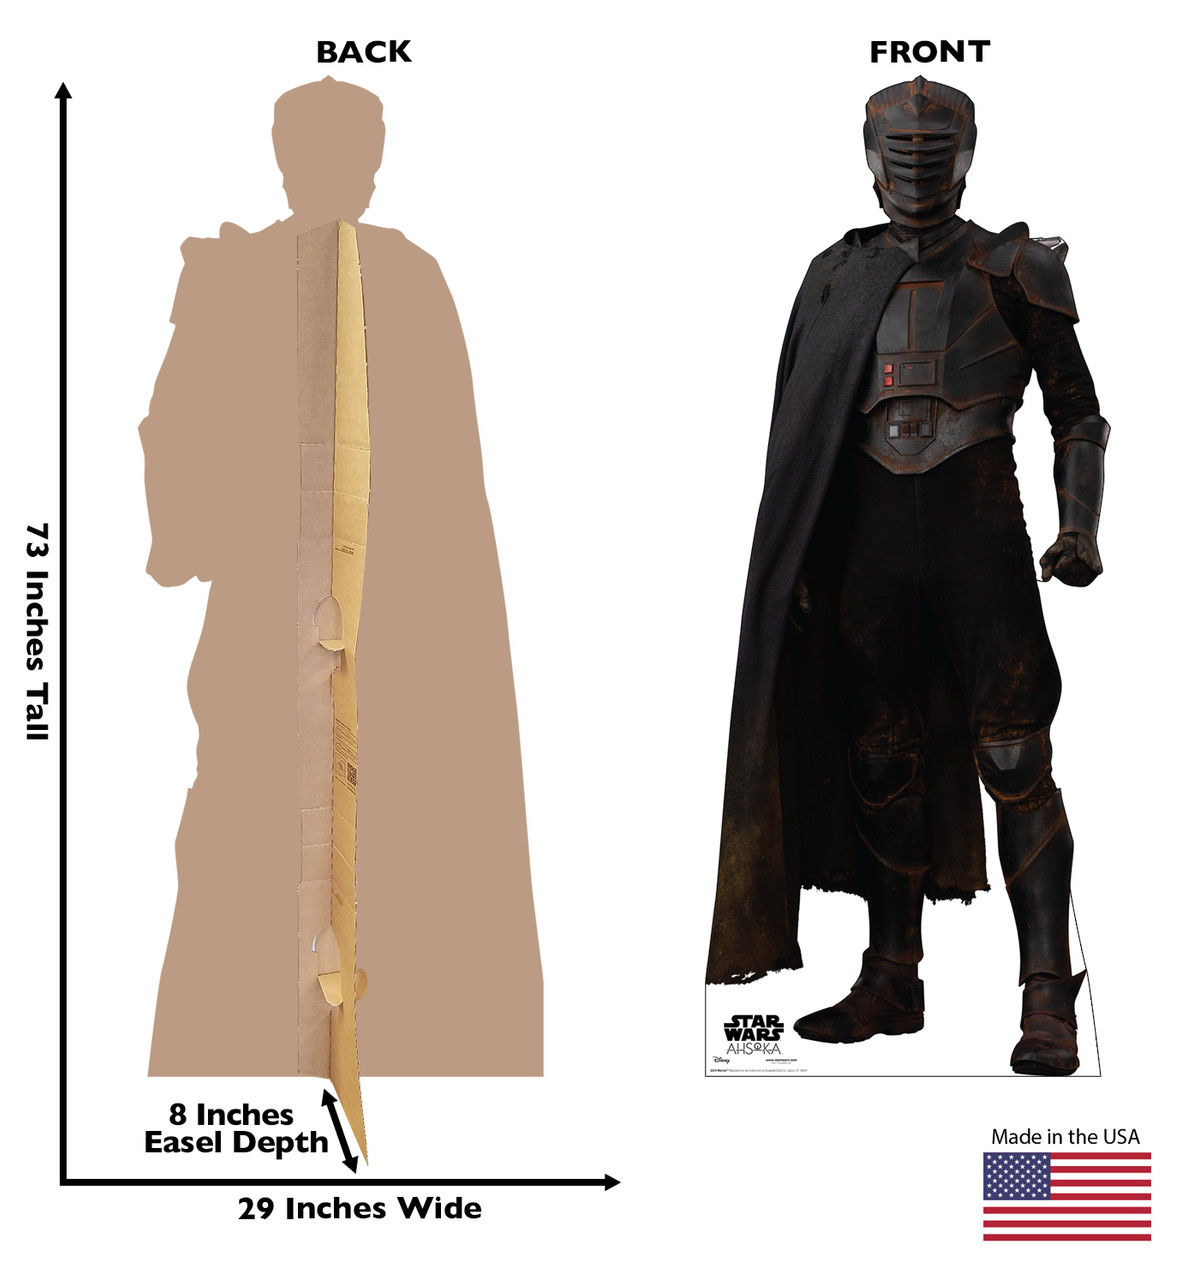 Life-size cardboard standee of Marrok with back and front dimensions.